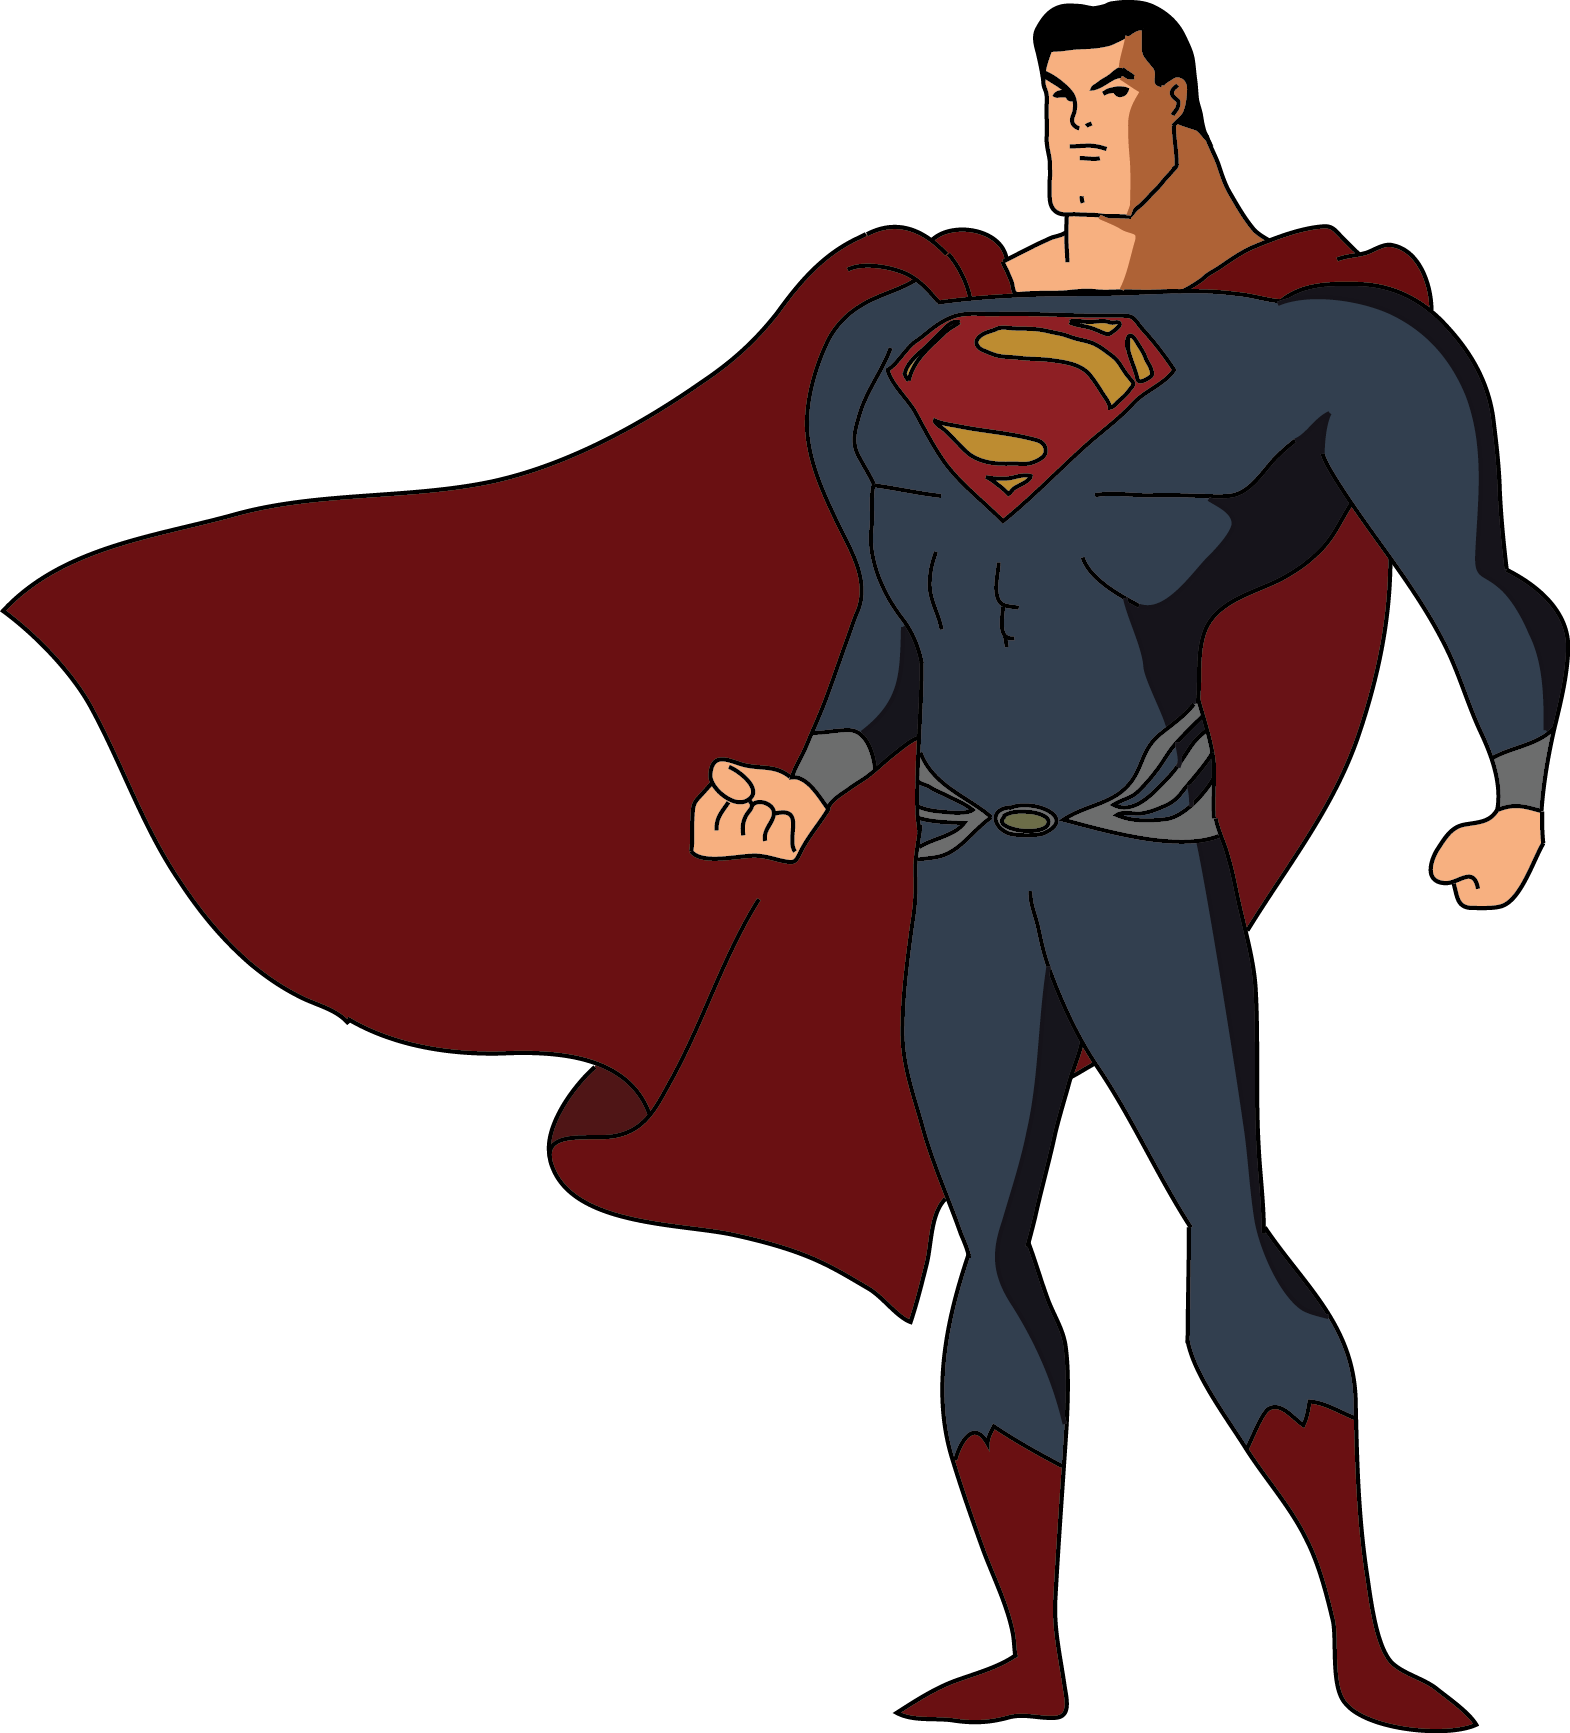 man_of_steel_superman__dcau_style__by_boygos-d6fq59v.png